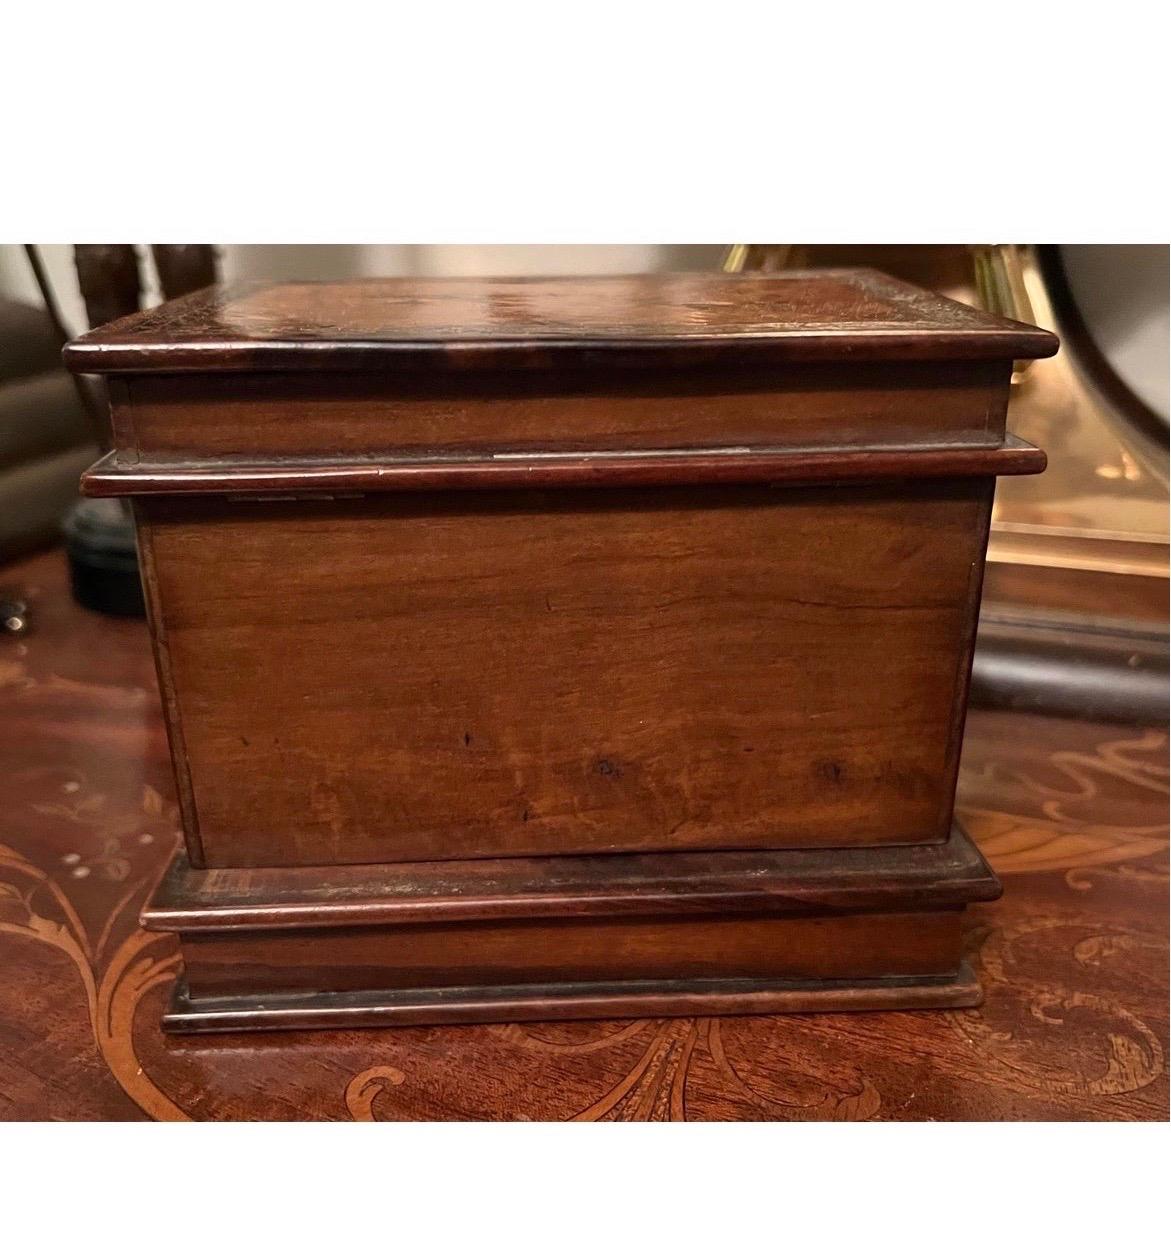 French Provincial Antique Marquetry Inlaid Faux Book Front “Hidden Storage” Box For Sale